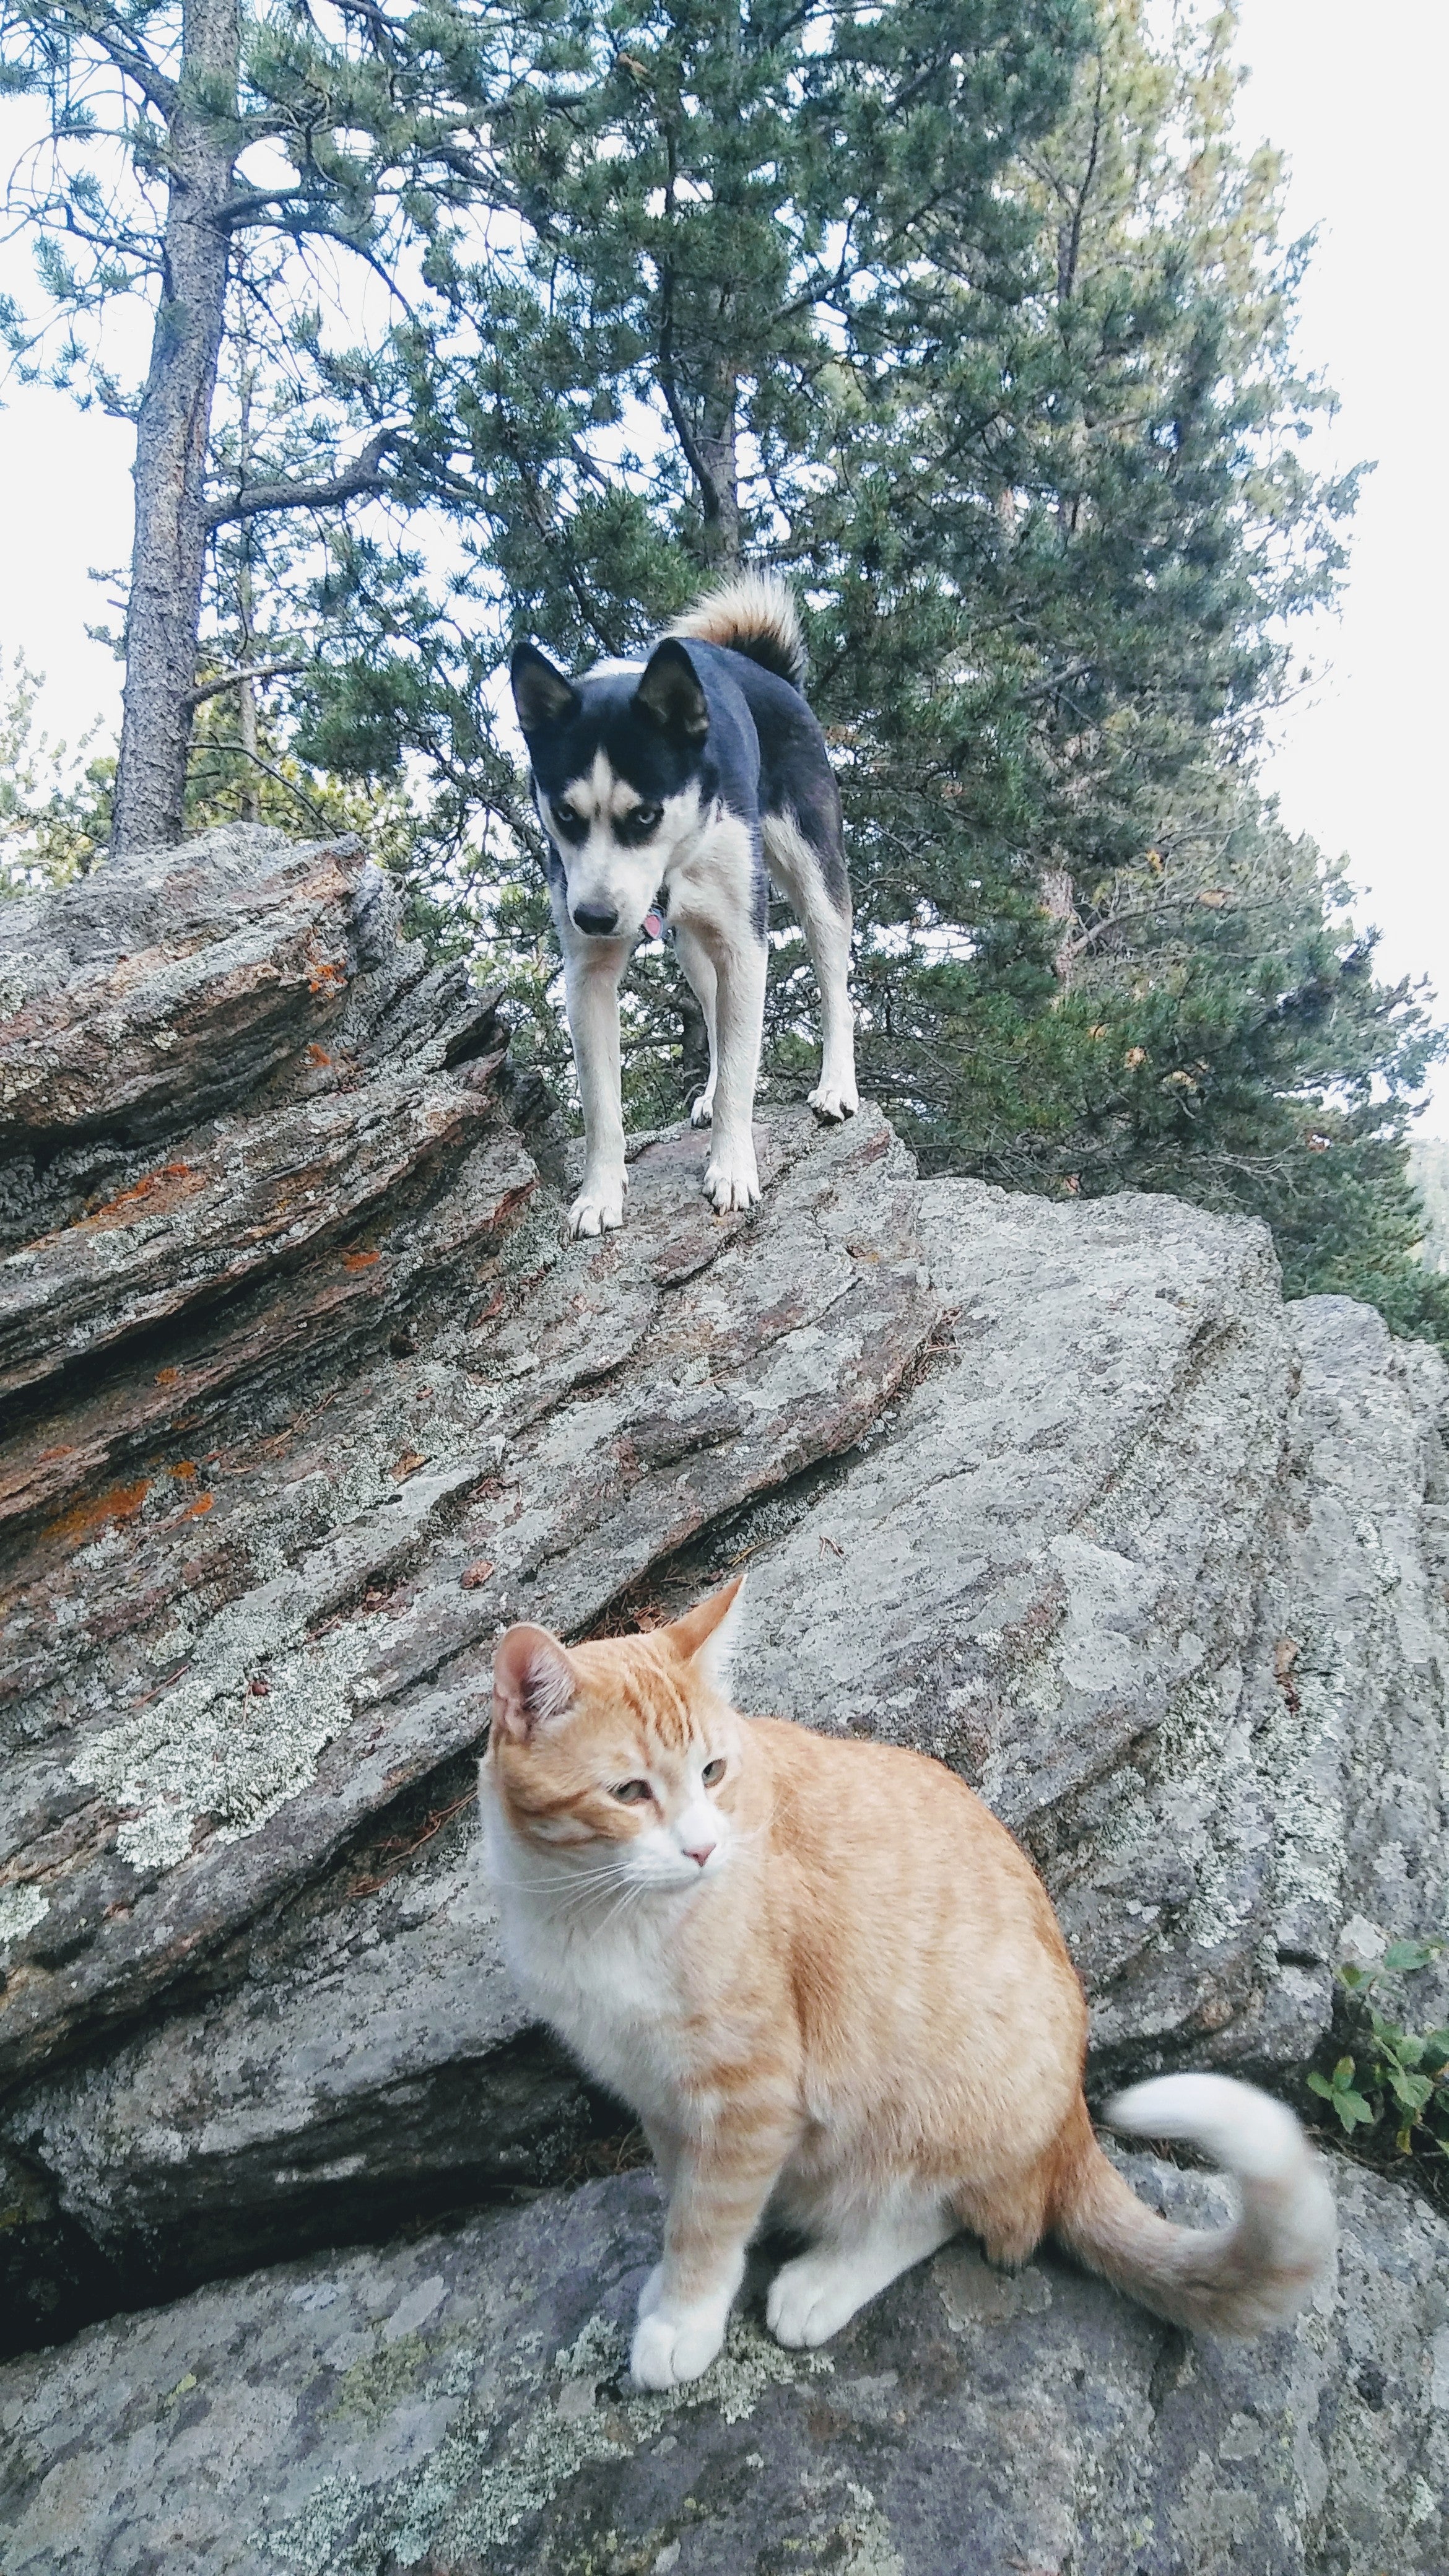 Our cat & pup playing on the boulders near campsite 13